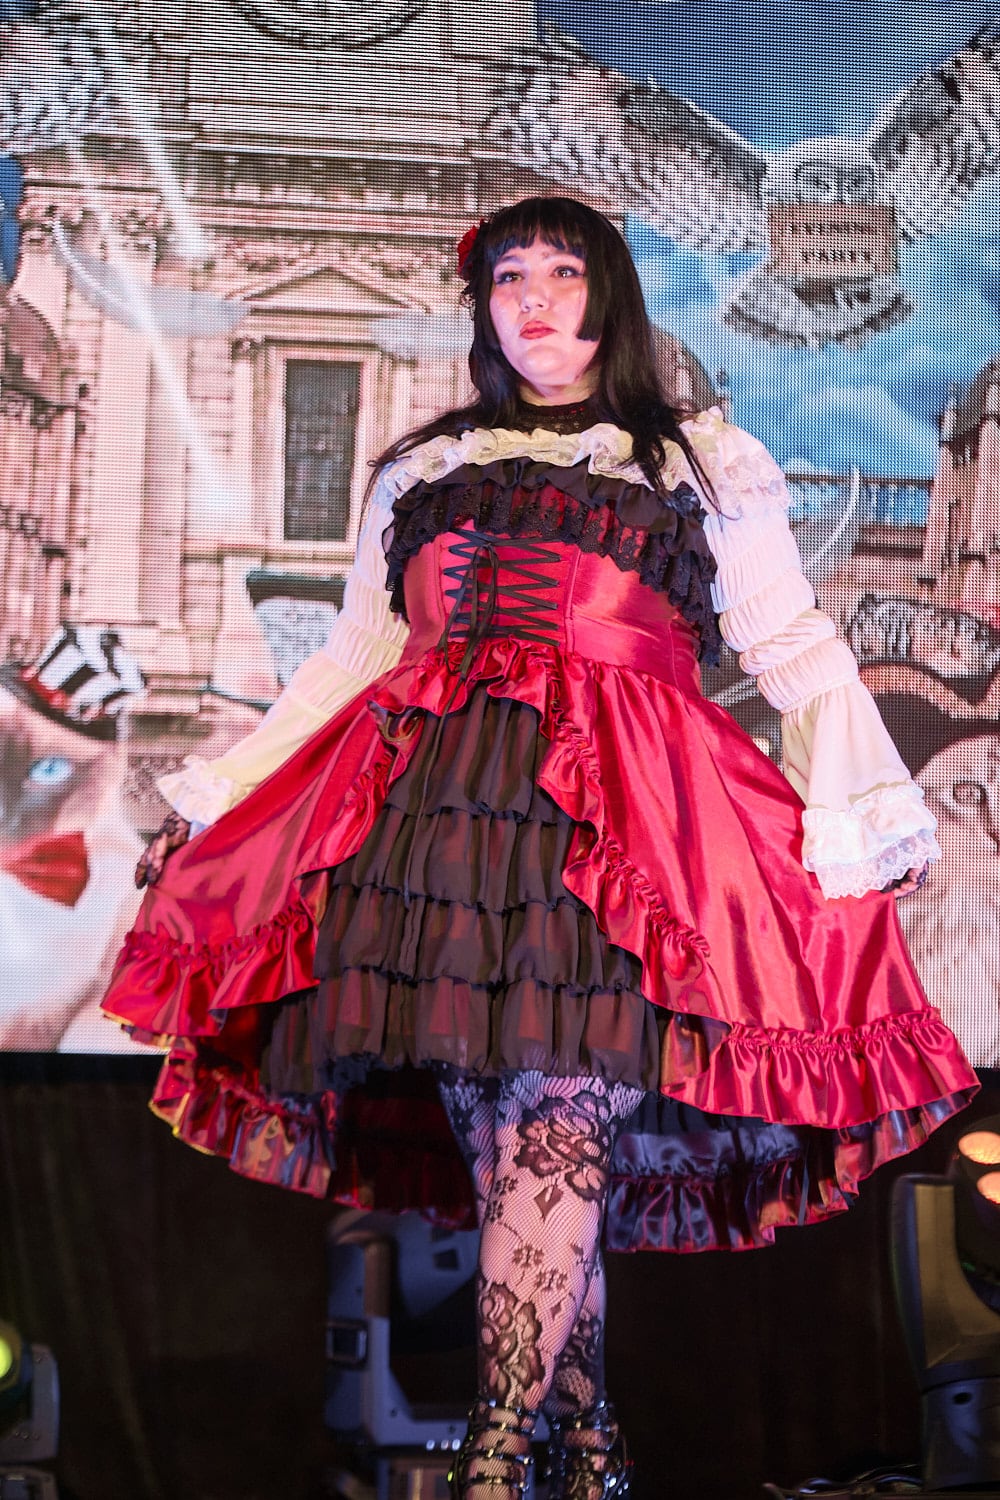 Plus size gothic lolita wearing red and black shantung bustle dress with white princess sleeve blouse, lace tights, and black shoes - closeup 2.